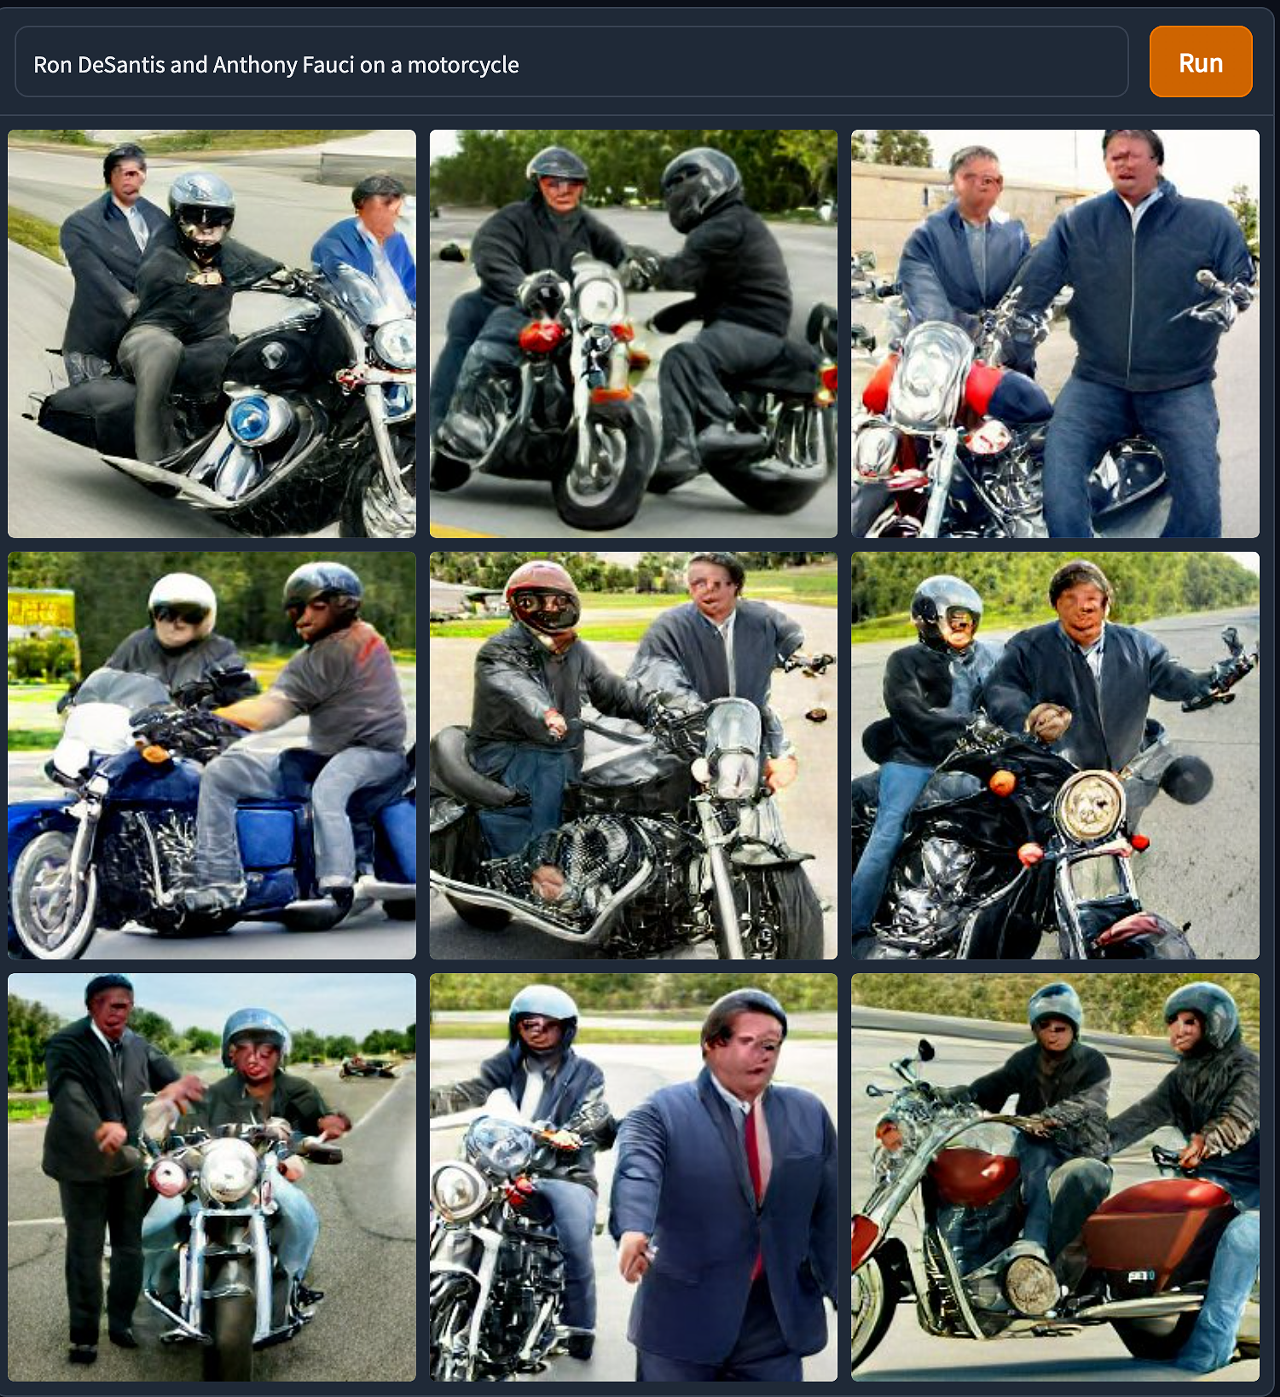 Ron DeSantis and Anthony Fauci on a motorcycle